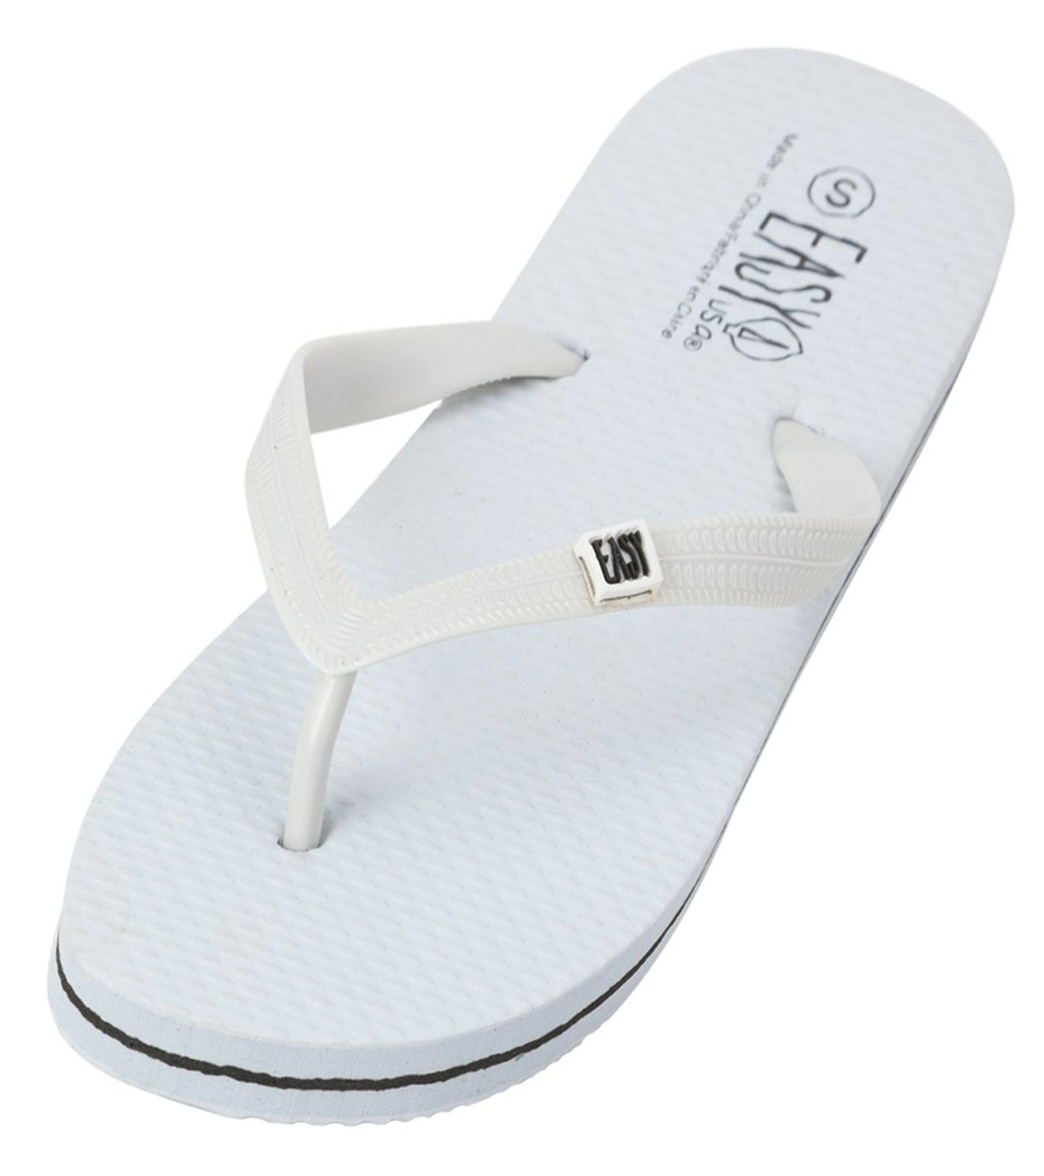 Easy Usa Women's Zory Flip Flop - White Small Size Small - Swimoutlet.com